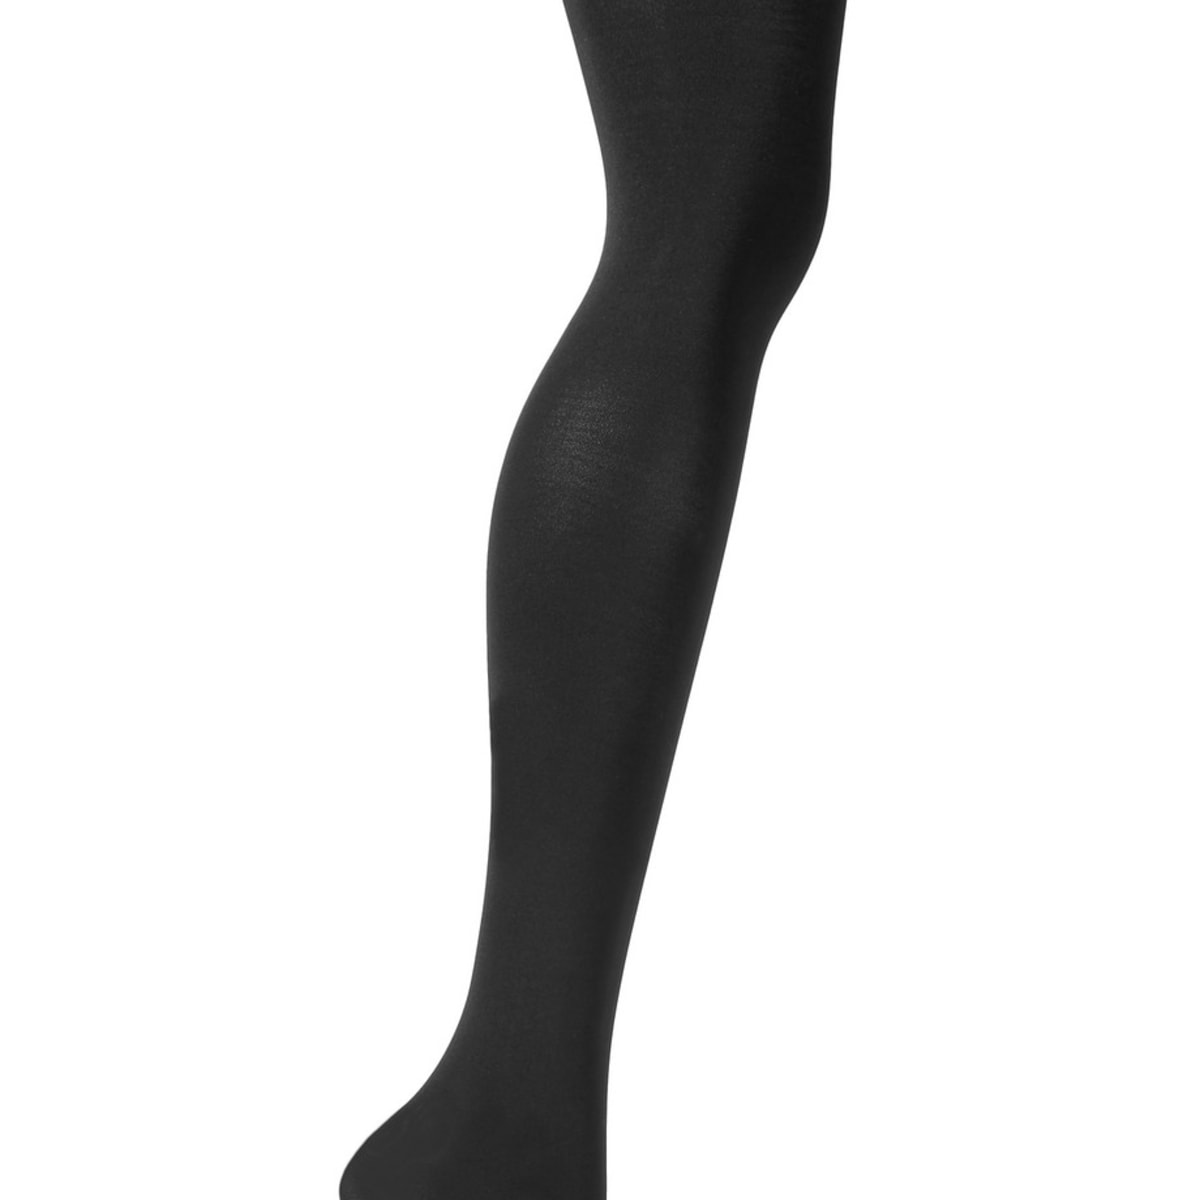 Spanx Luxe Leg Tights Review - Fashionista